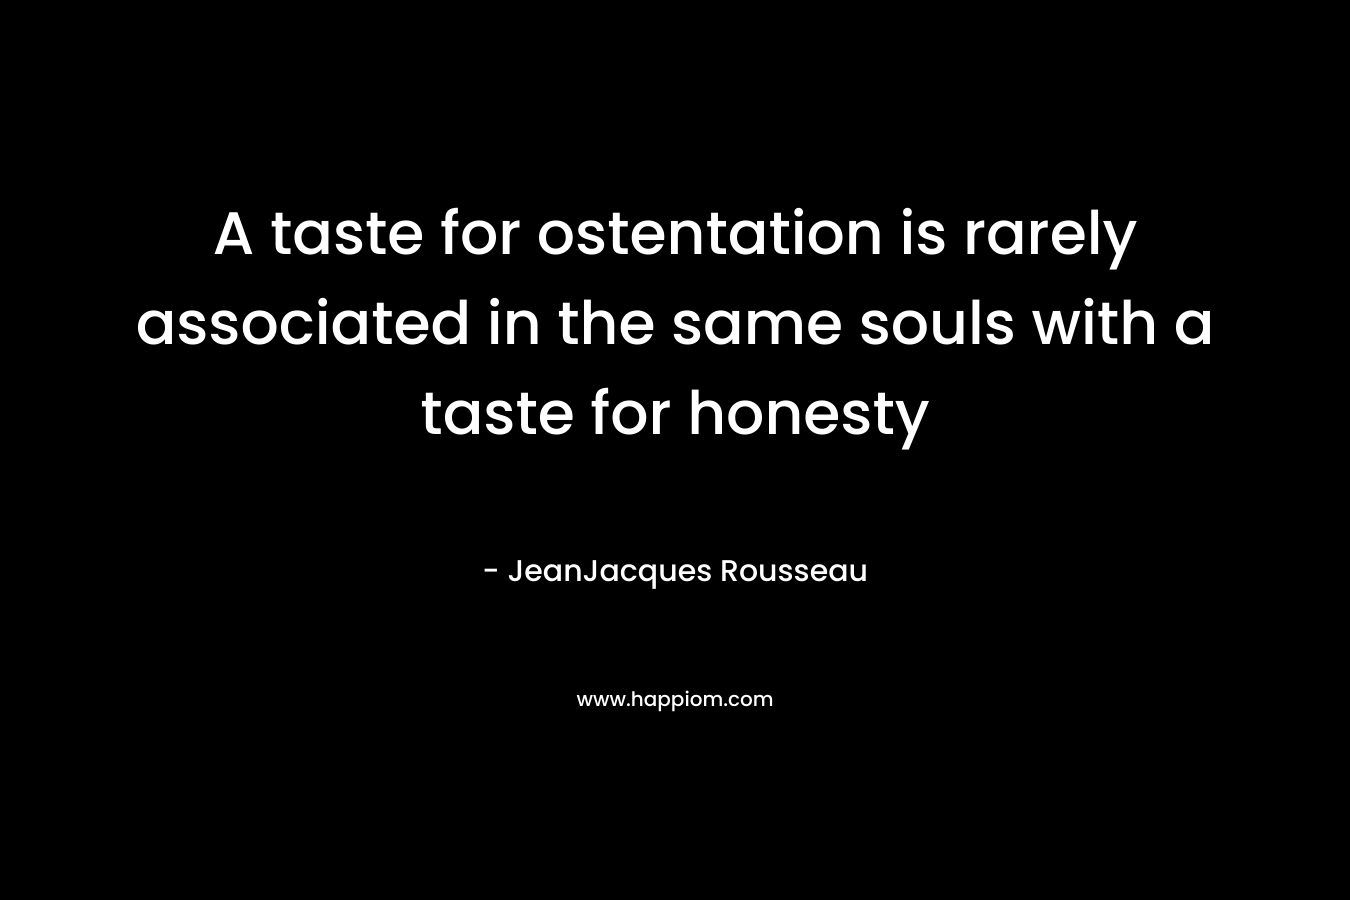 A taste for ostentation is rarely associated in the same souls with a taste for honesty – JeanJacques Rousseau